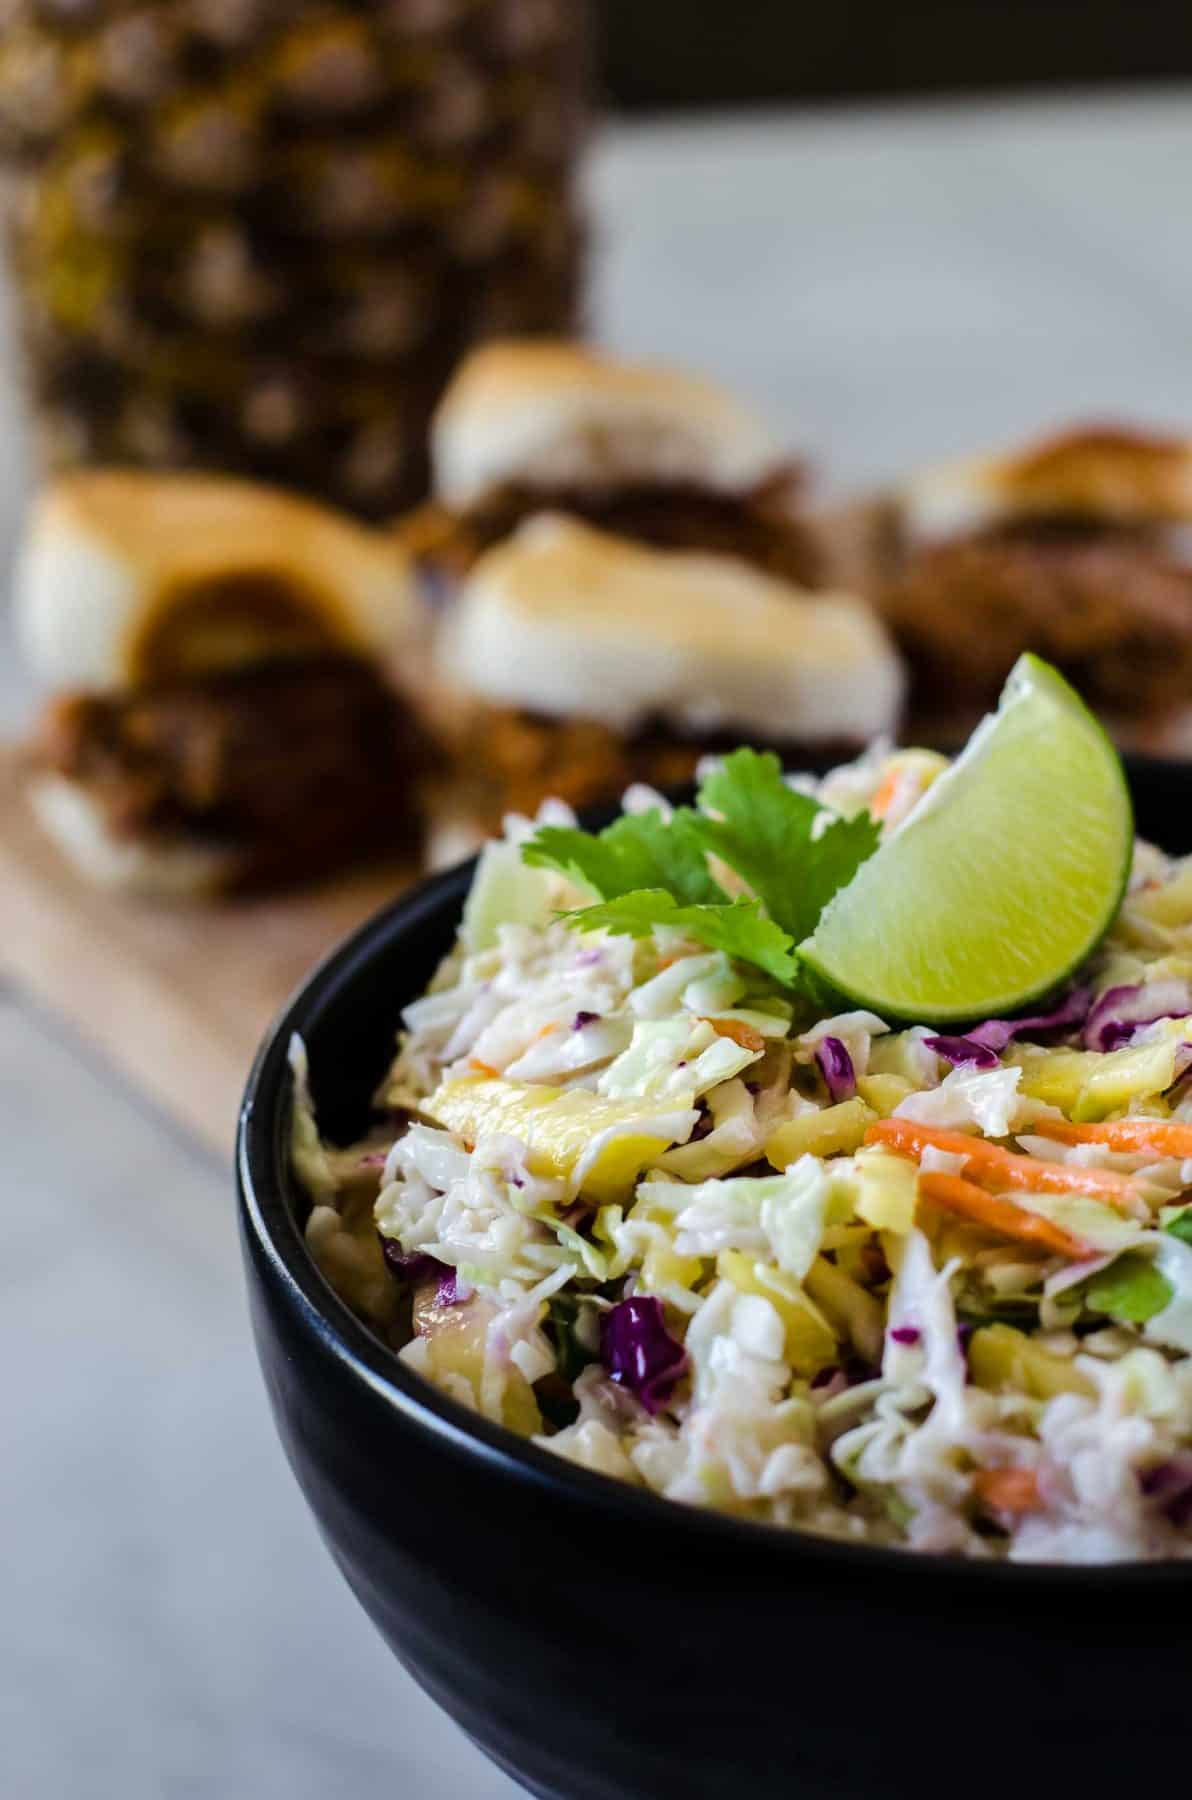 Bring the best dressed slaw to your next BBQ! This fast & easy Fresh Pineapple Coleslaw adds a little tropical flair to the otherwise ordinary side, making it a great topping for everything from sliders to hot dogs!